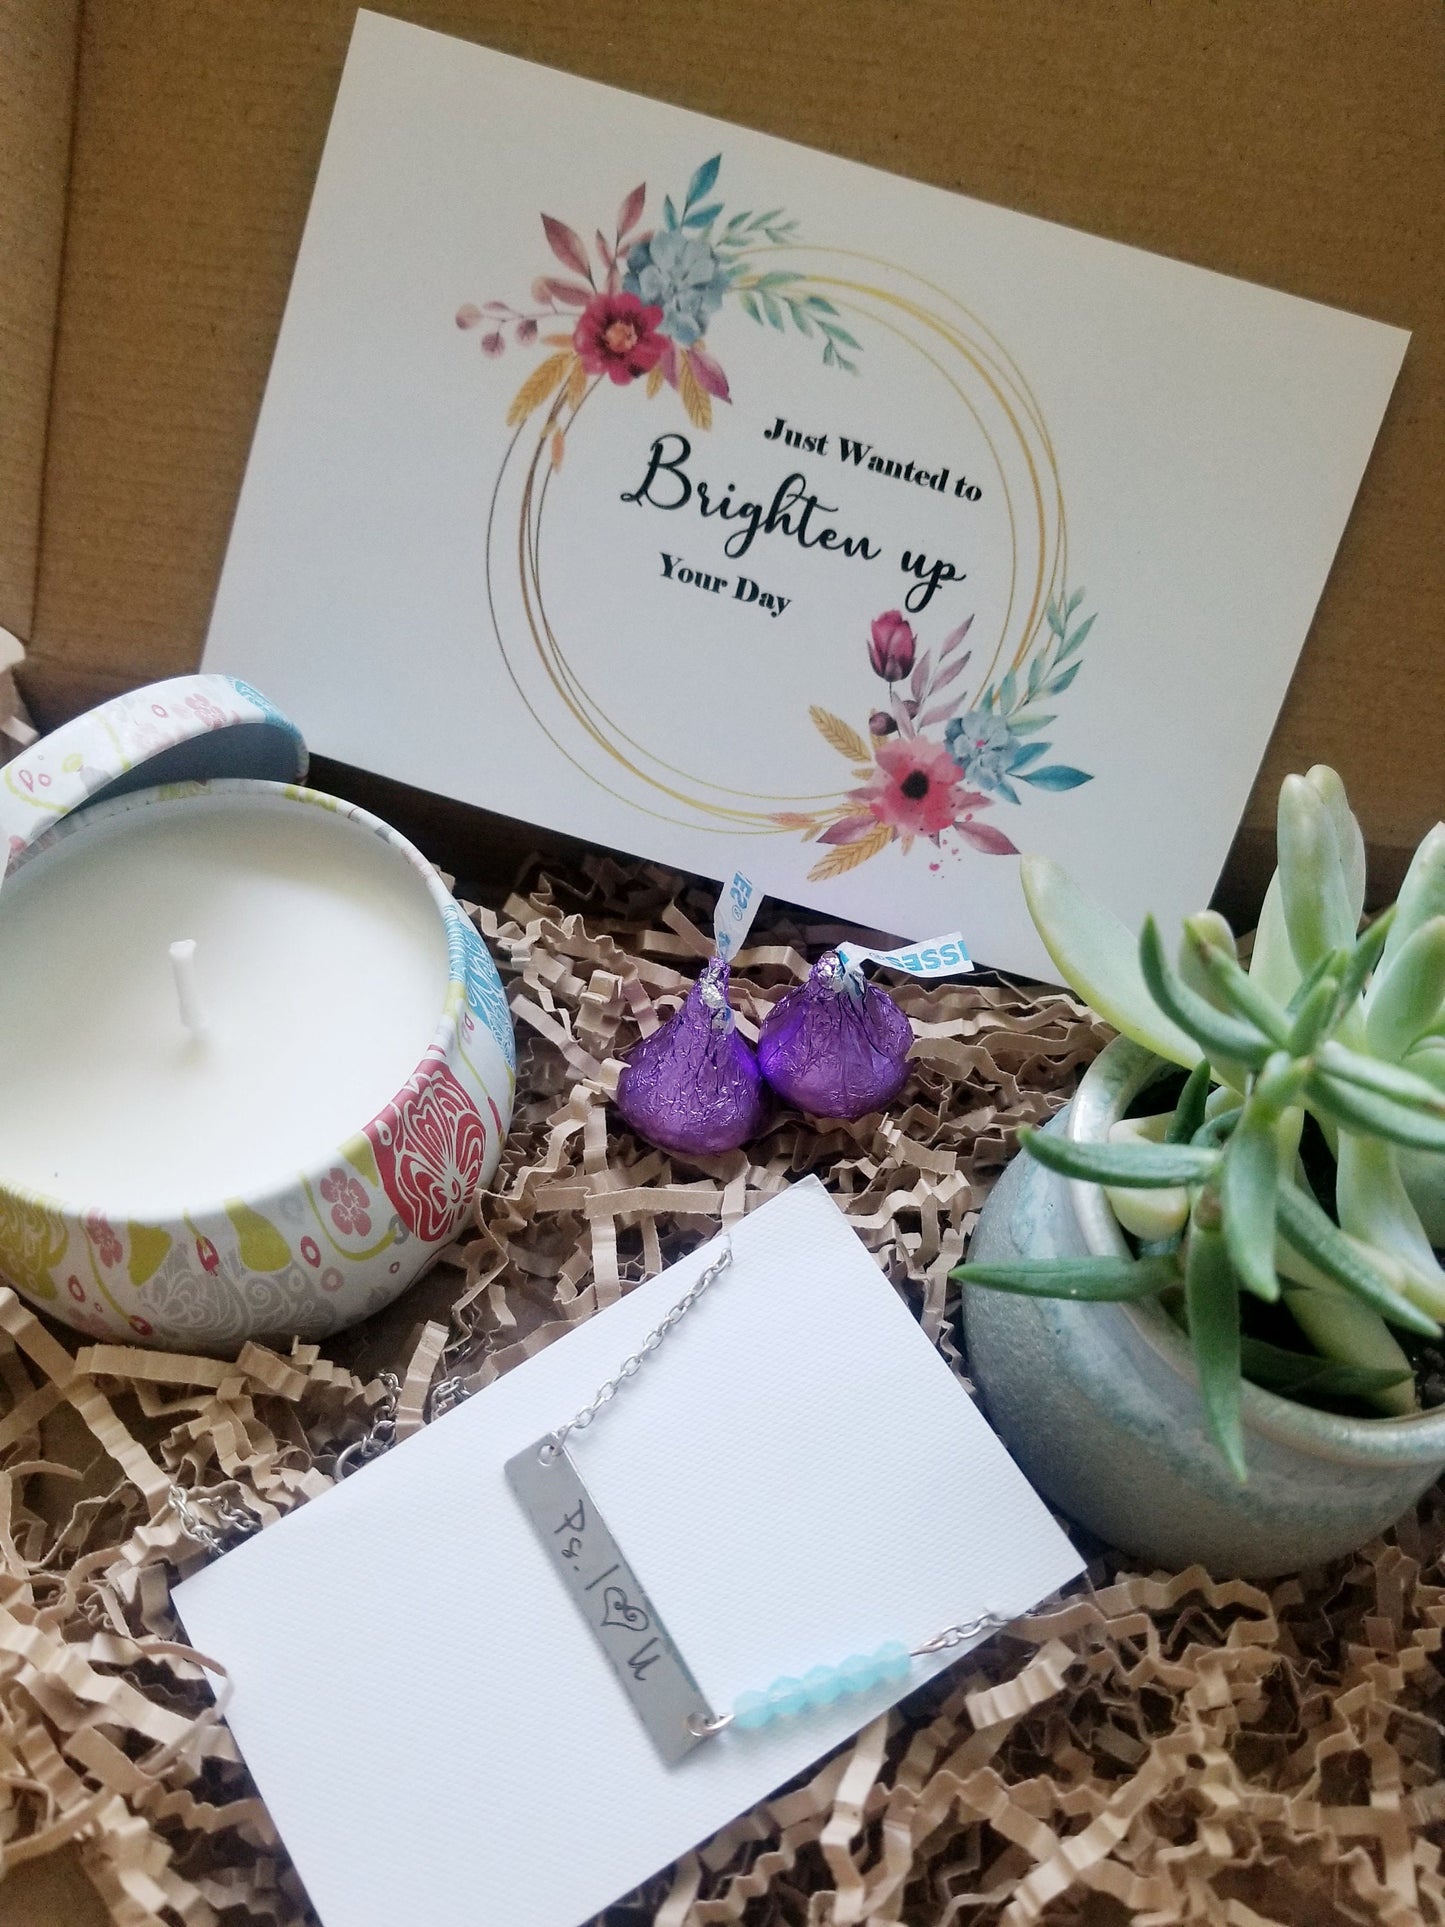 Just wanted to brighten your day - Encouragement care package, Candle, succulent and necklace